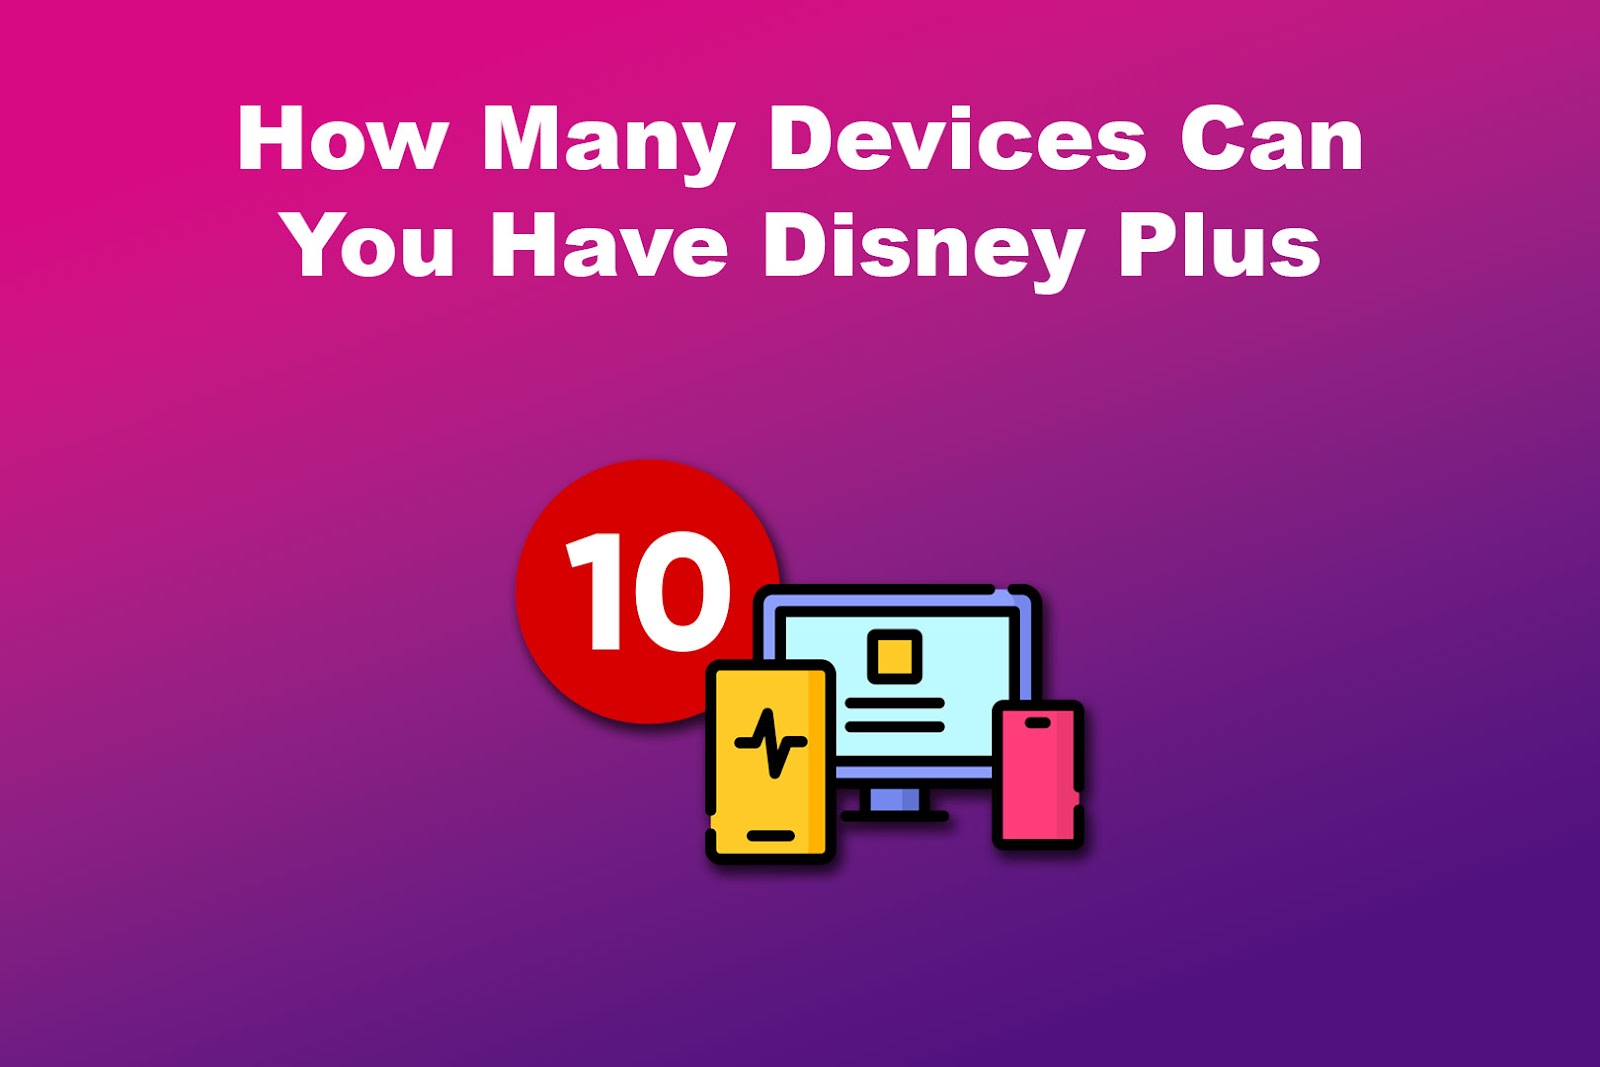 How Many Devices Can You Have Disney Plus